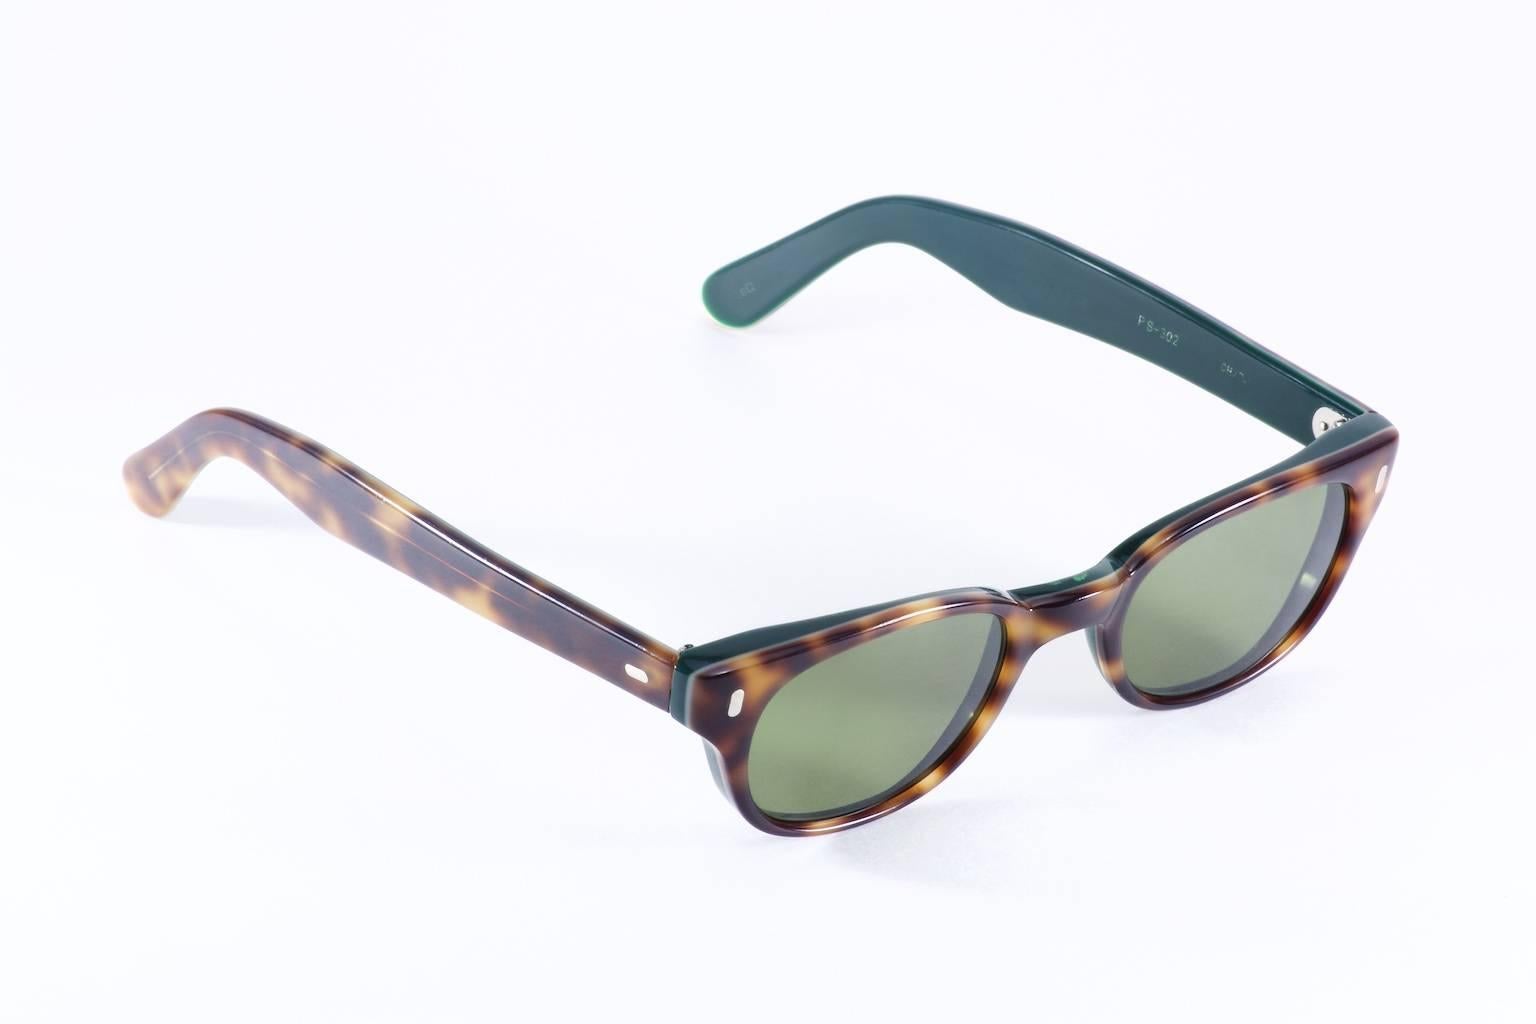 Here’s a great pair of vintage acetate sunglasses handcrafted by the Paul Smith company. The design features a classic design, lenses are new with UV/UVA protection.
These come from Hotel de Ville Eyewear in Los Angeles 
Follow us on Instagram,